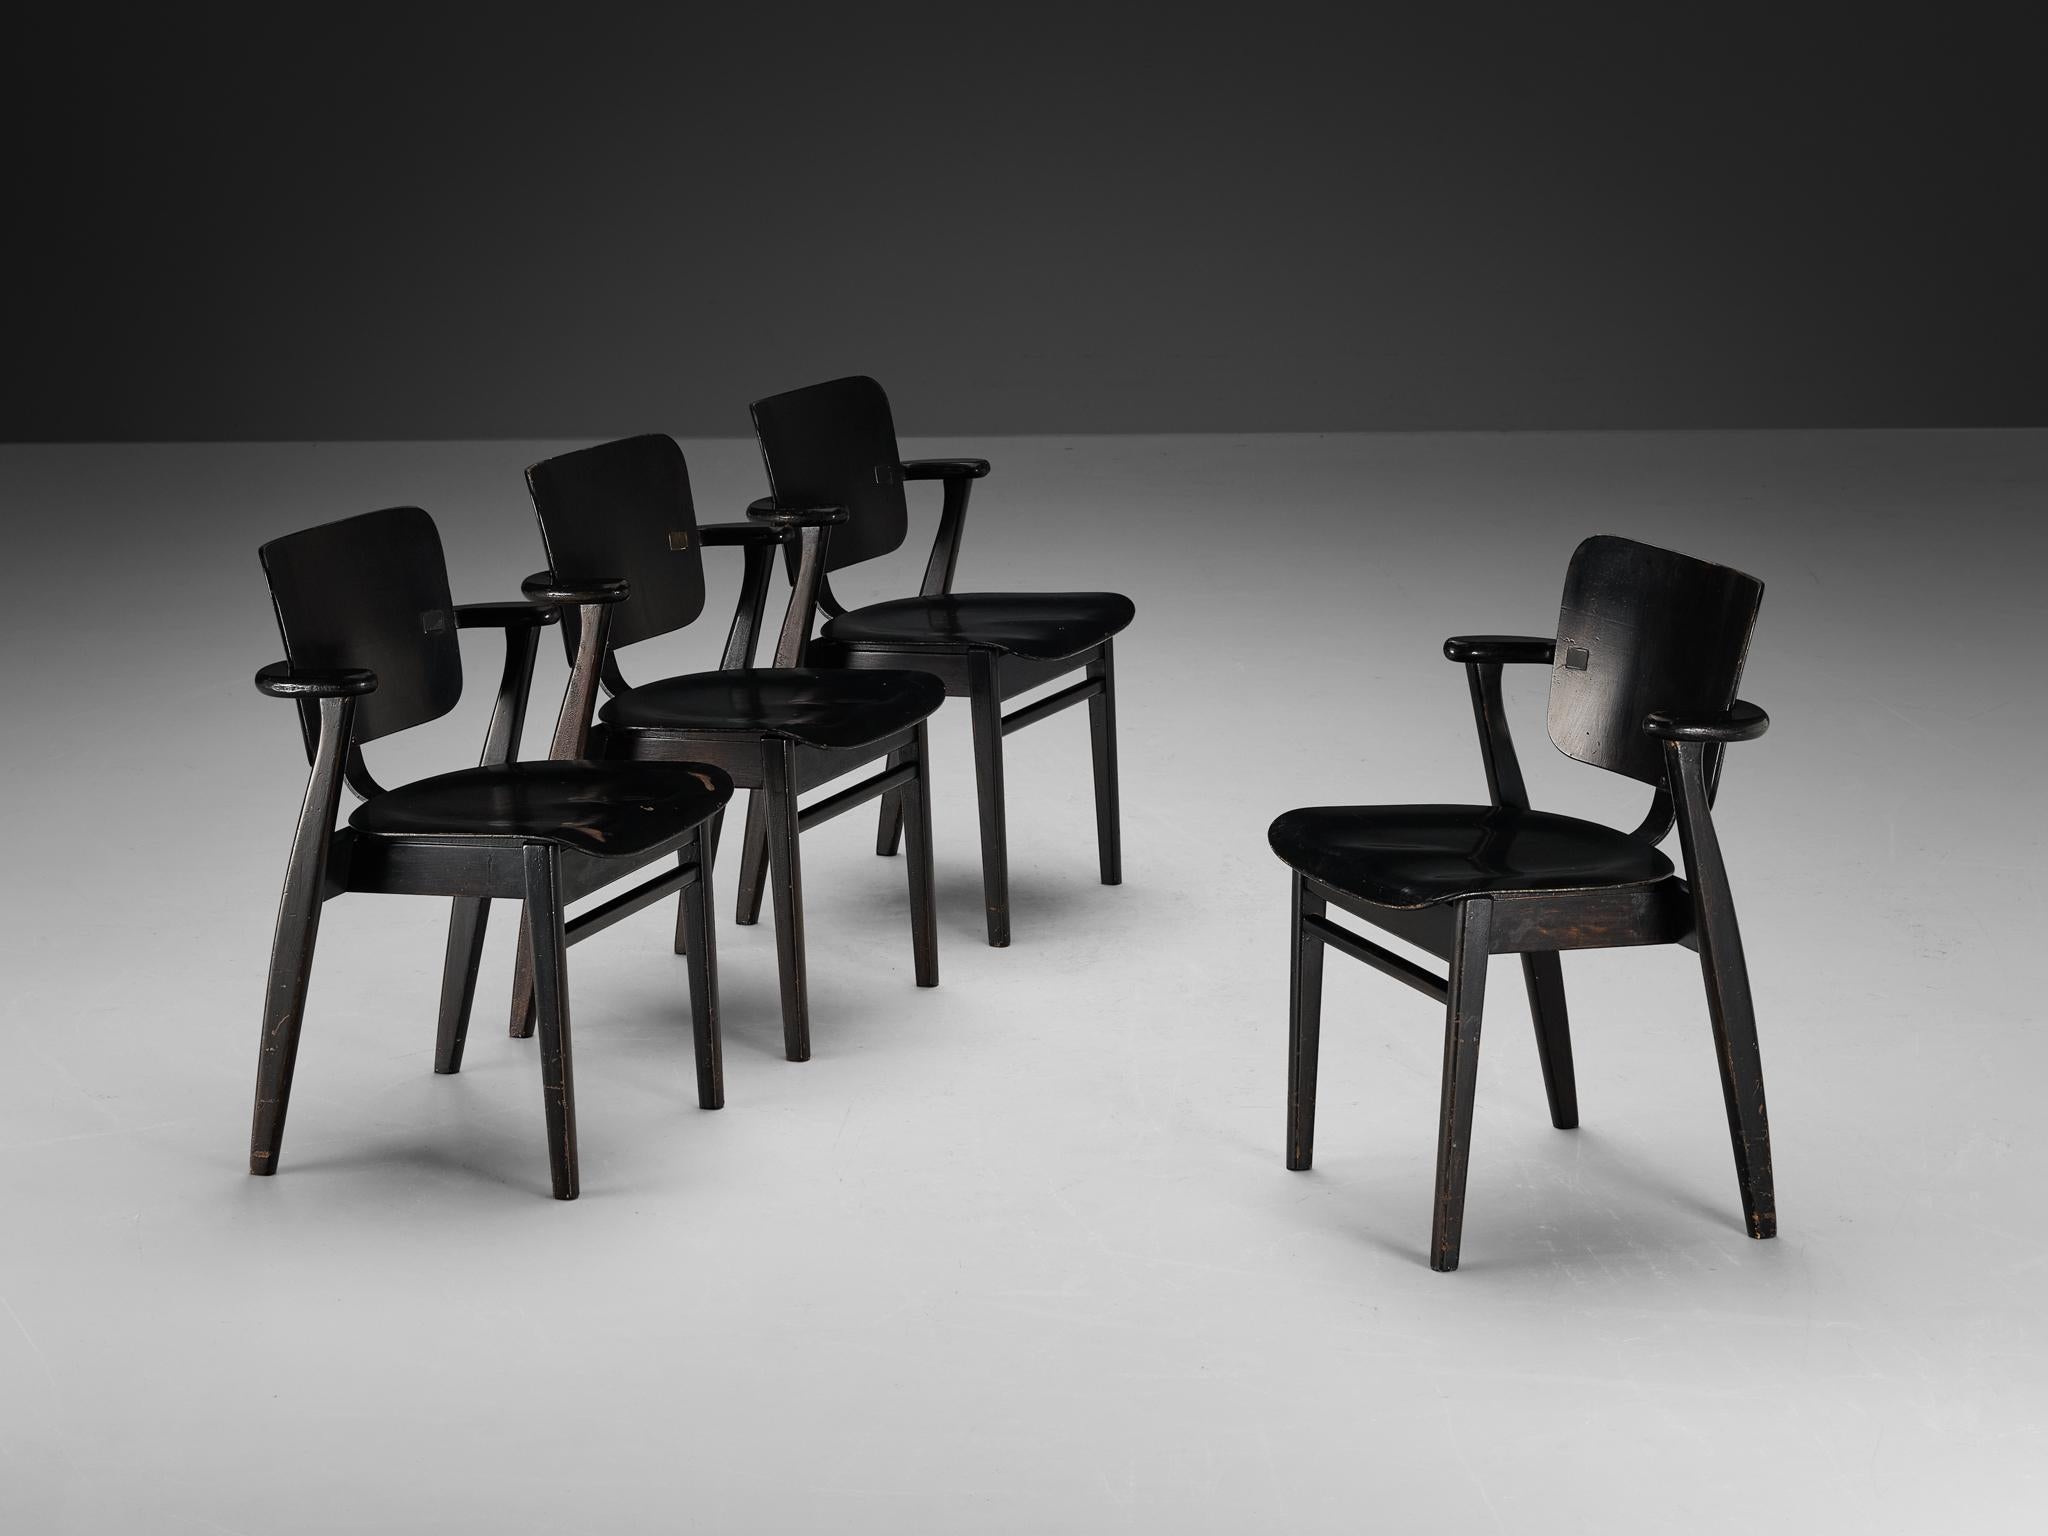 Ilmari Tapiovaara, set of four armchairs, stained teak, metal, Finland, 1953

This is a wonderful set of early ‘Domus’ armchairs by Finnish designer Ilmari Tapiovaara. Executed in a black color, the framework includes laminated teak plywood. This